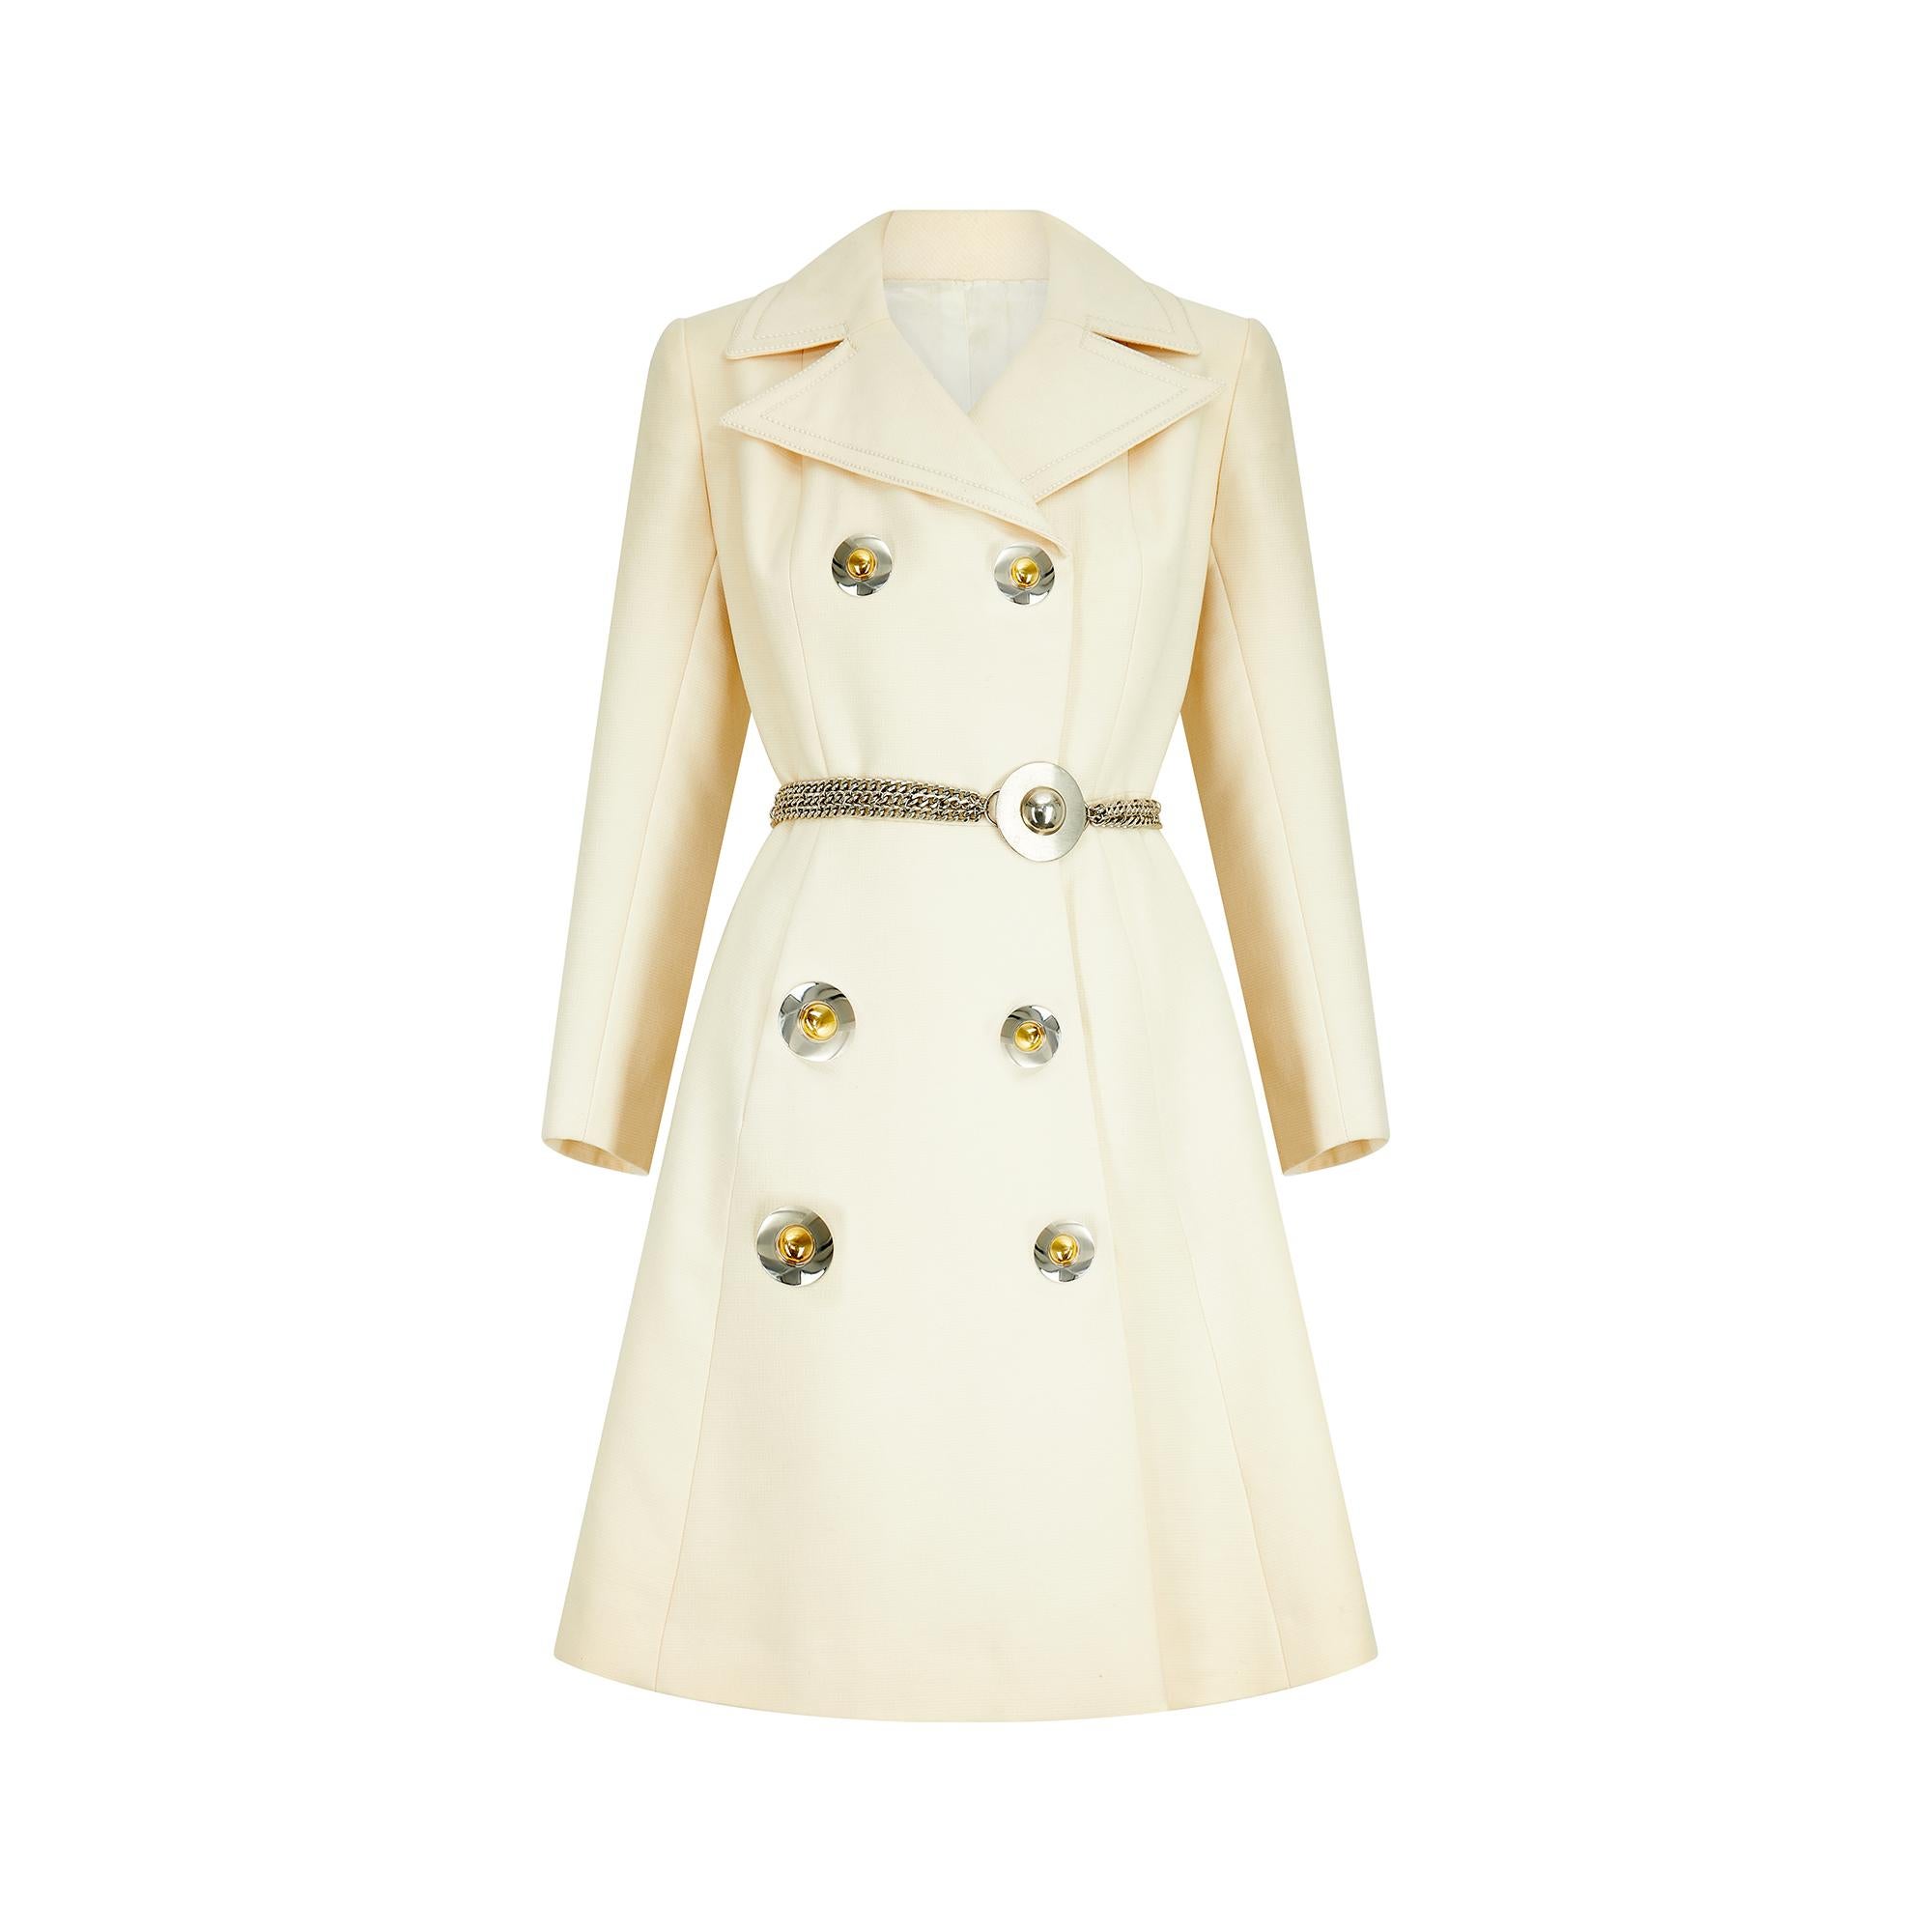 Unmarked, but possibly attributed to Pierre Cardin, this double-breasted coat features the space age detailing the Italian-French couturier was known for.  Classically A-line tailored from cream wool with a bold tonal running stitch which edges the